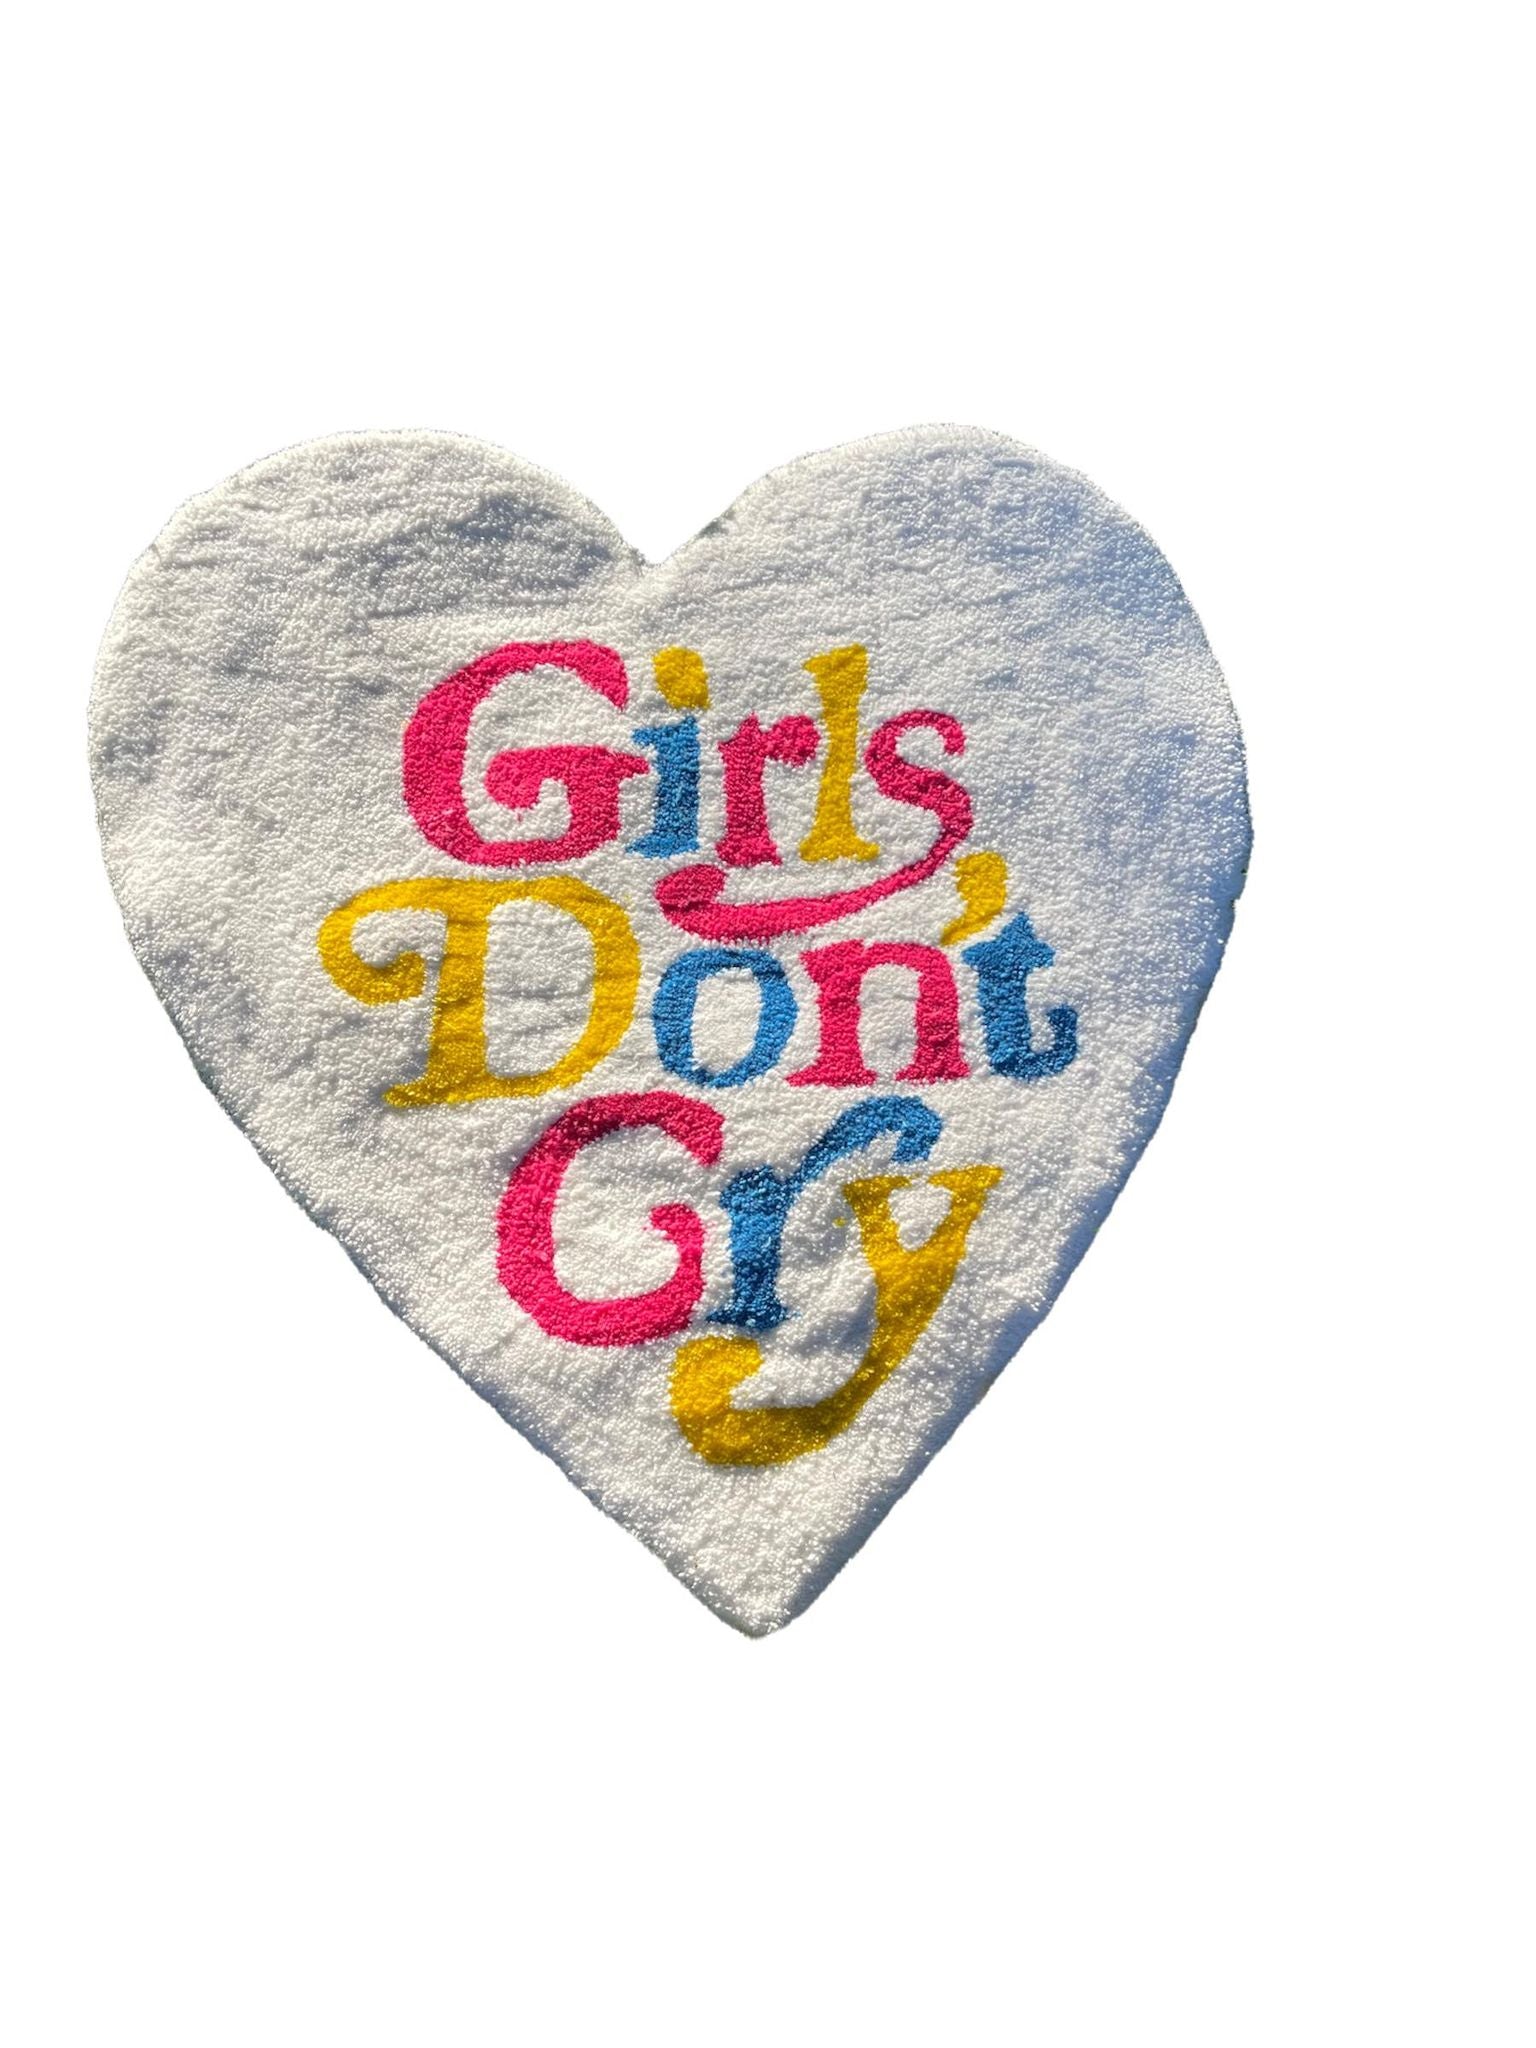 GIRLS DONT CRY RUG